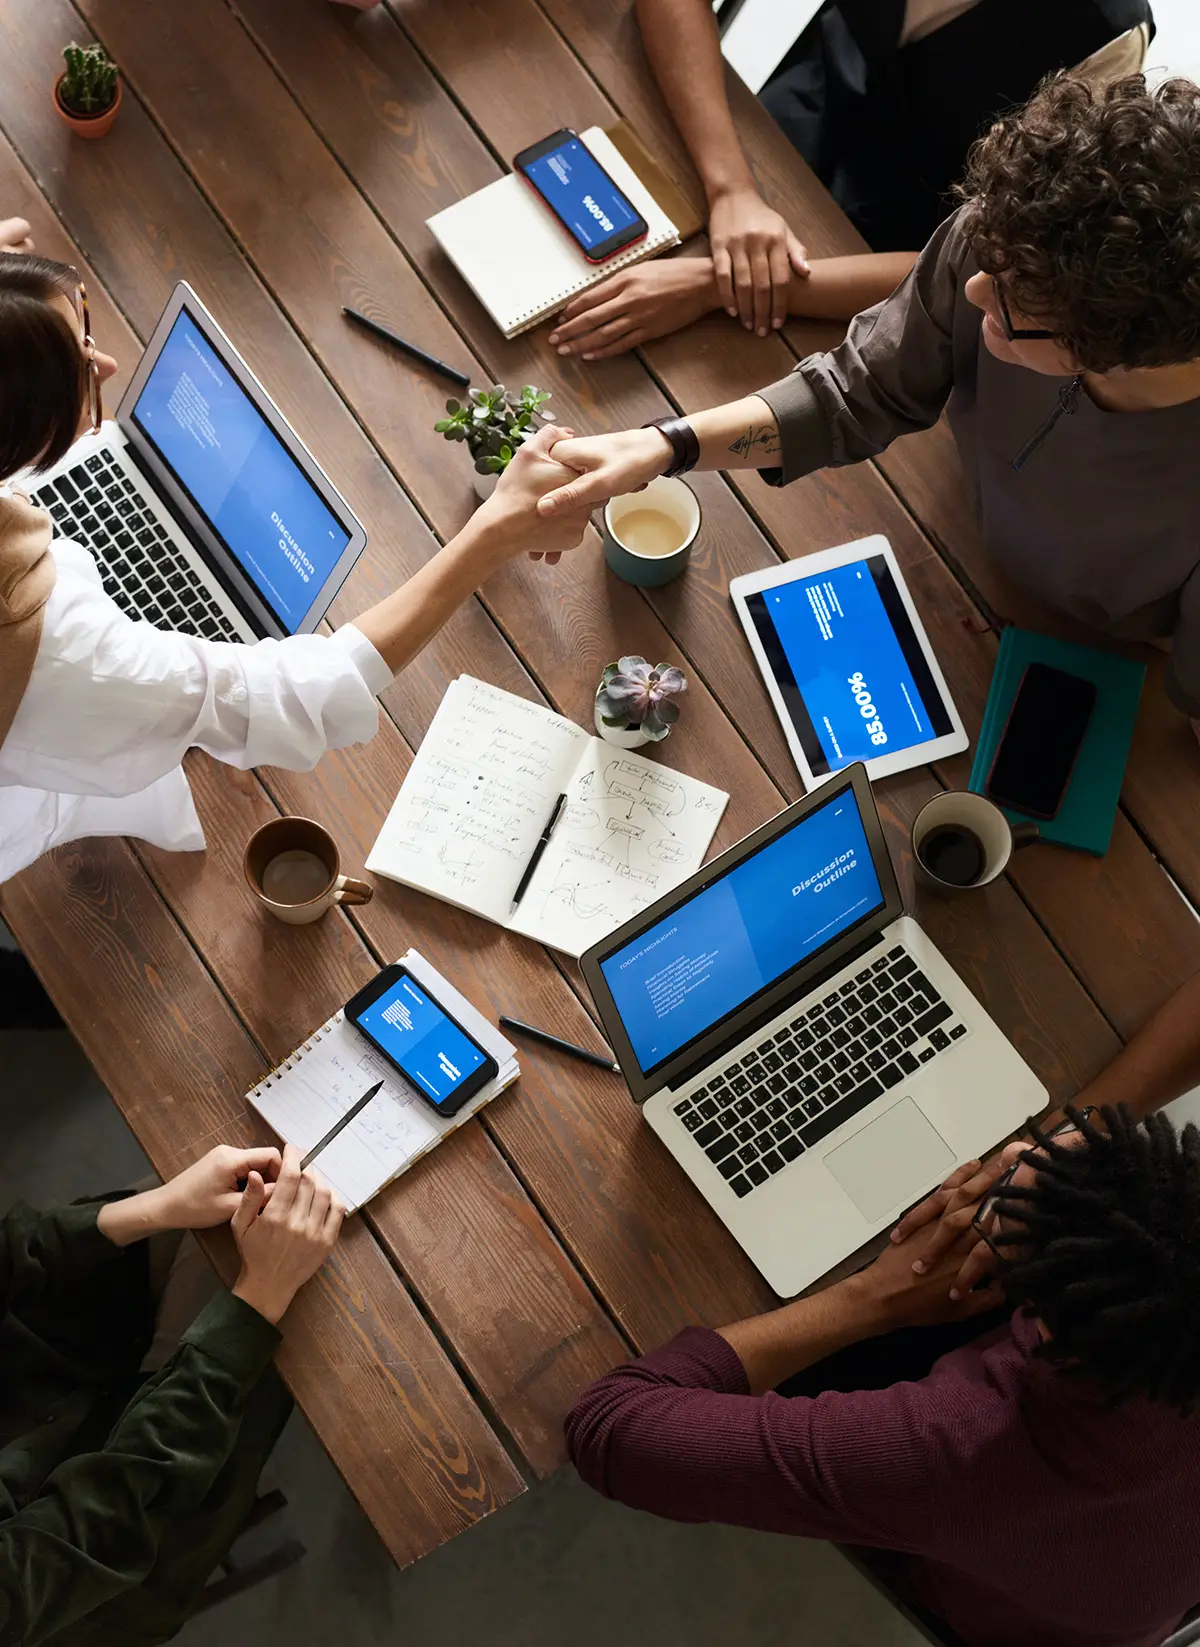 Group of individuals sitting at a table as a woman and a man are shaking hands across the table as there are laptops, a tablet, and smartphones nearby